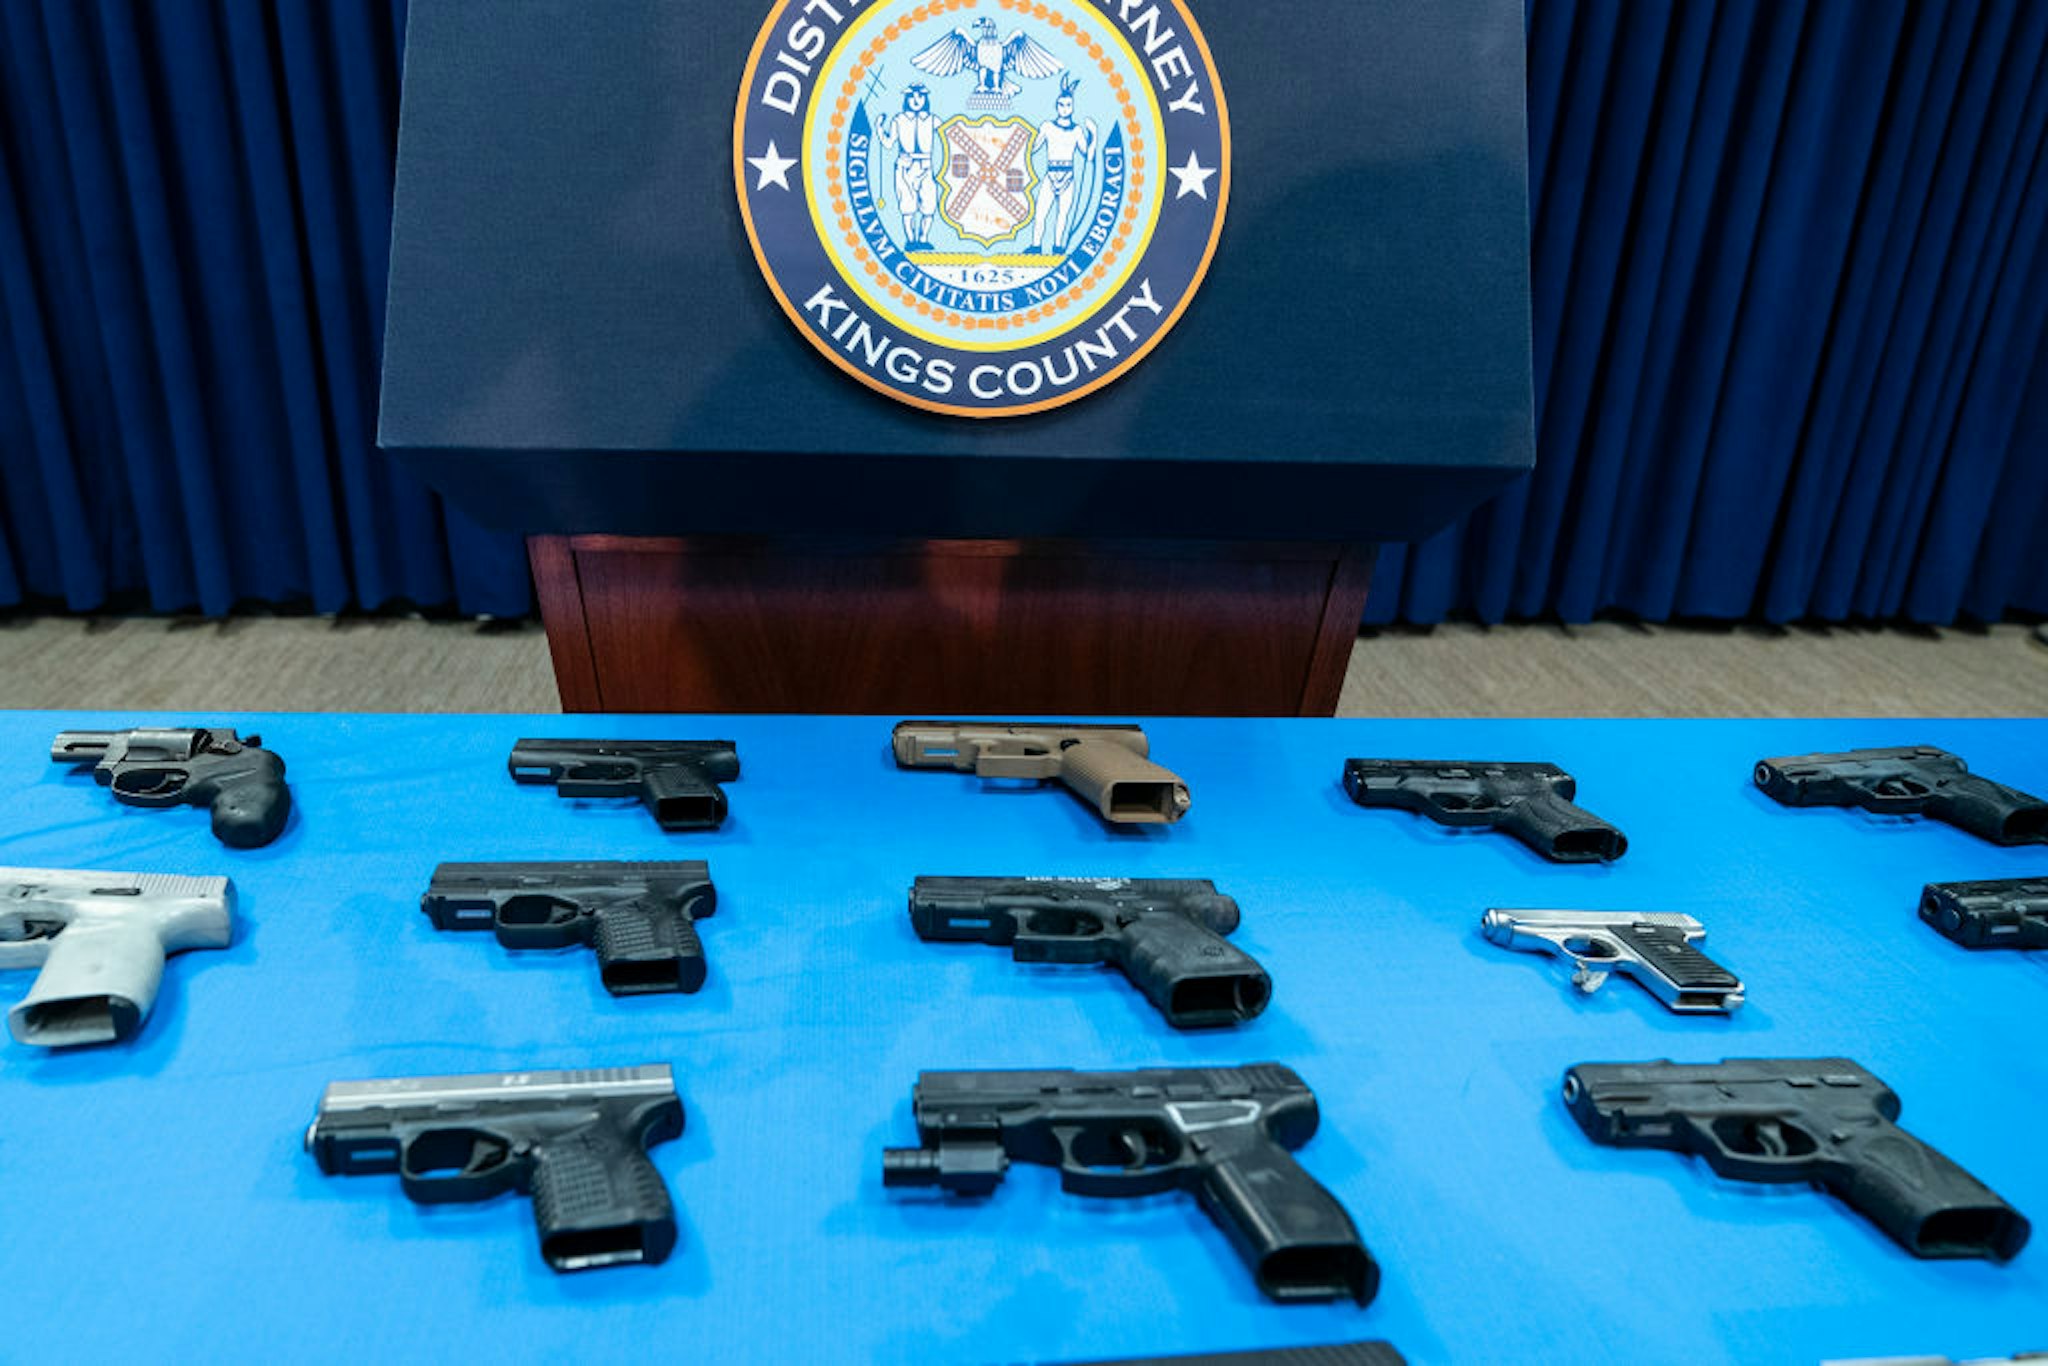 Guns confiscated from gang members on display during Brooklyn District Attorney Eric Gonzalez press conference in District Attorney office.